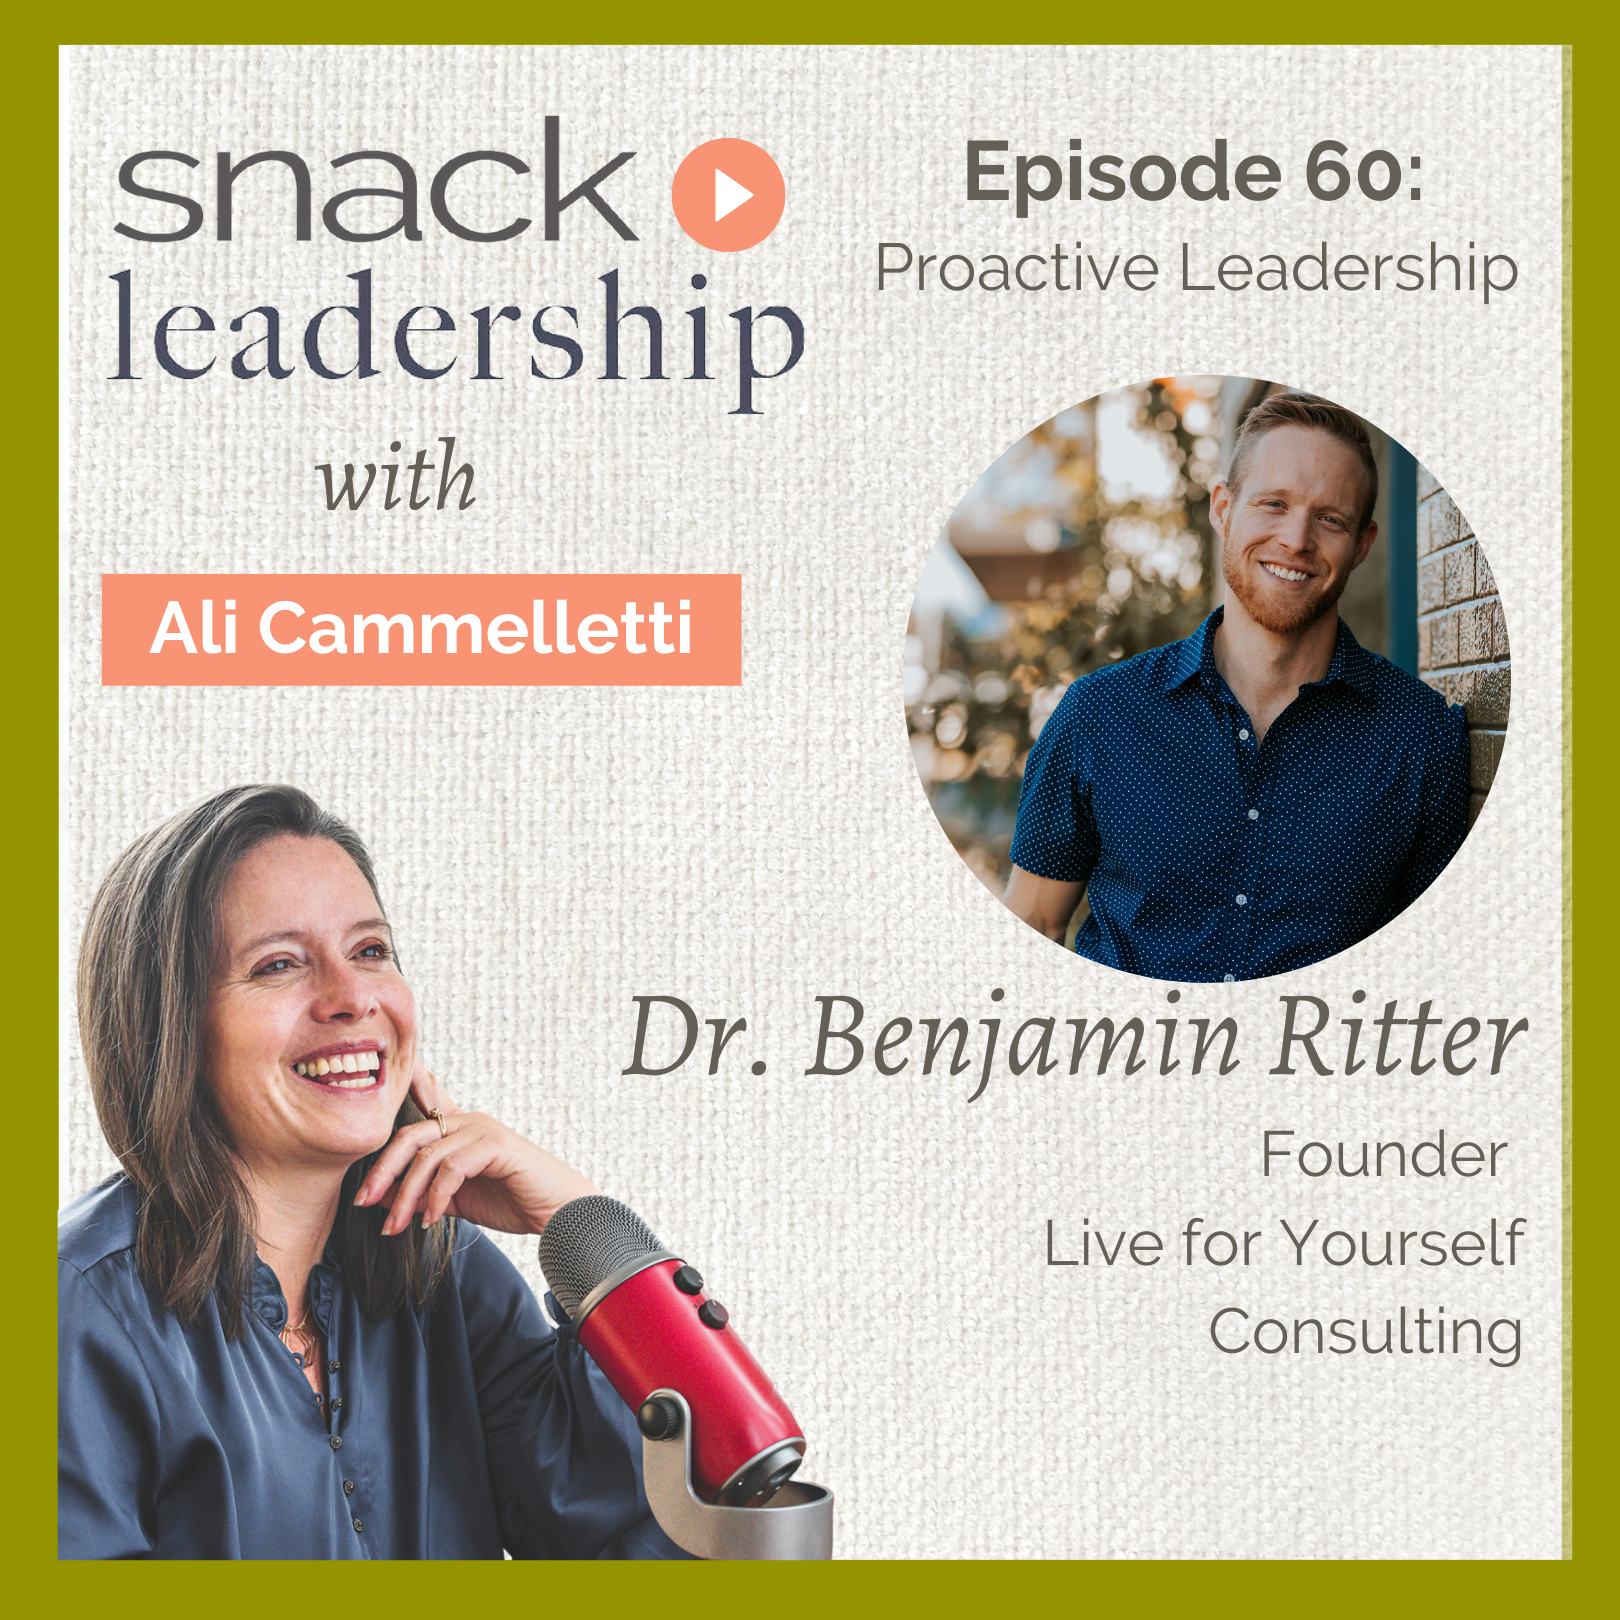 Proactive Leadership with Dr. Benjamin Ritter